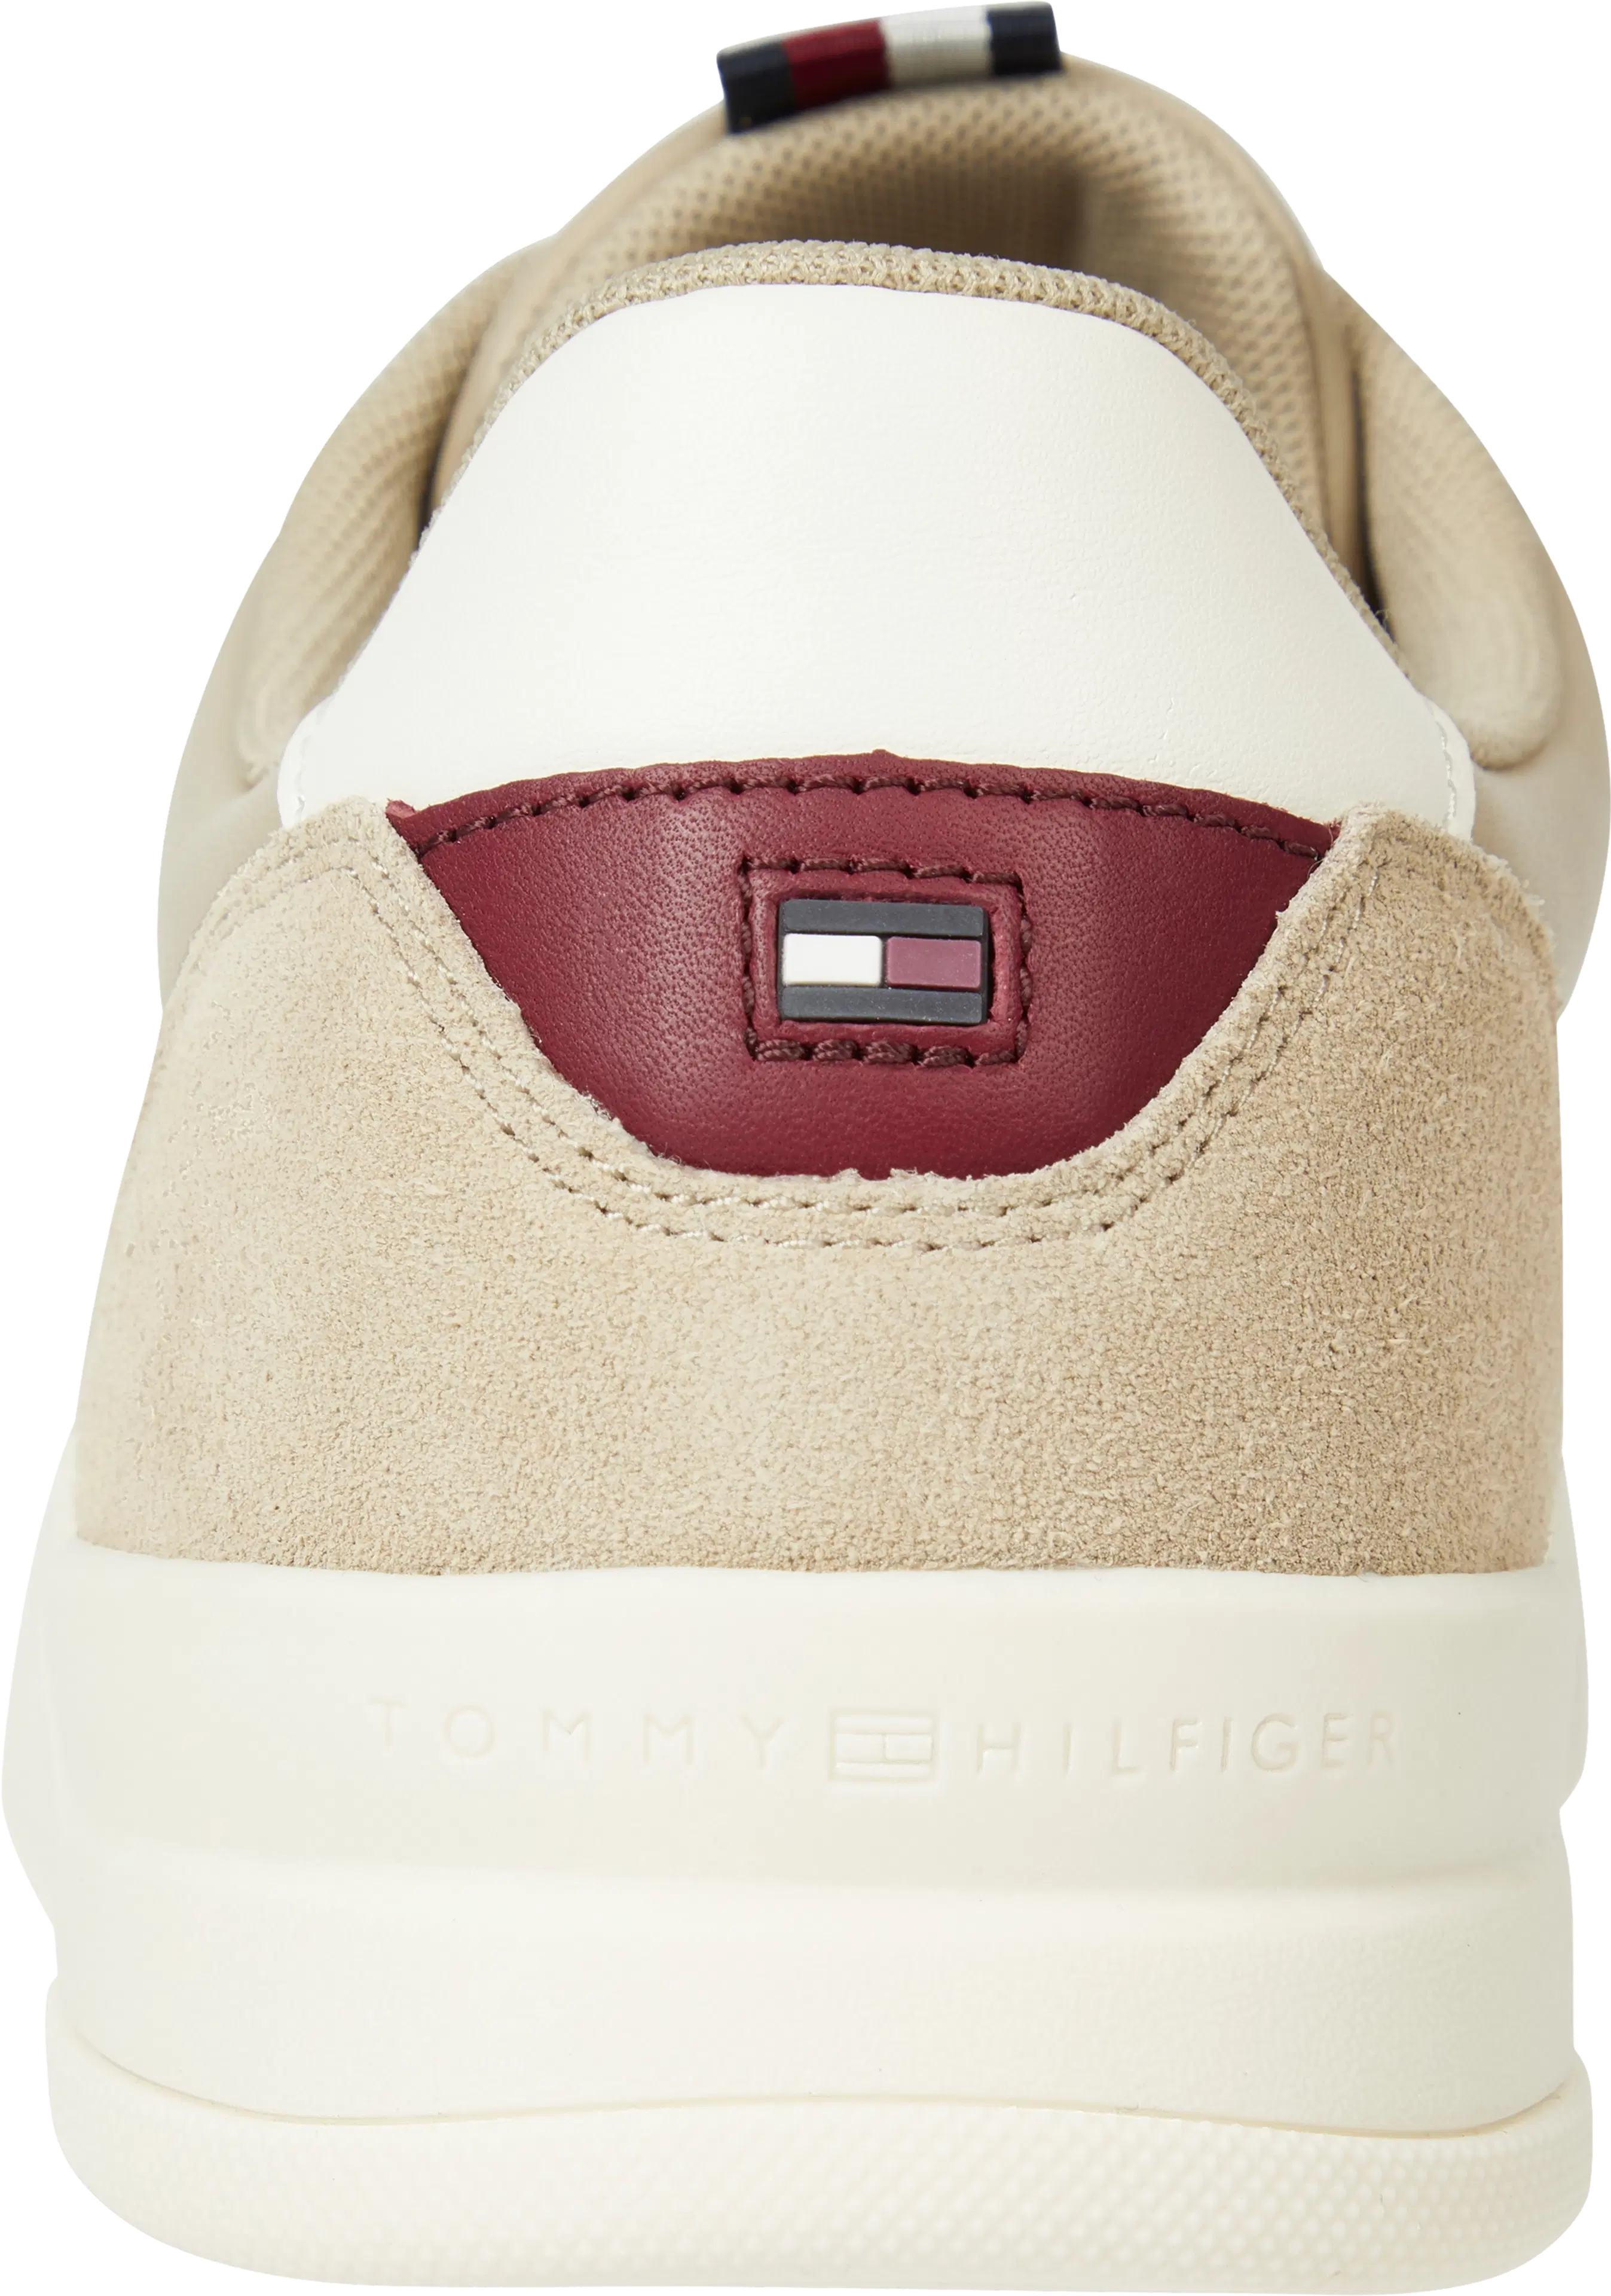 Tommy Hilfiger Elevated Cupsole lenkkarit